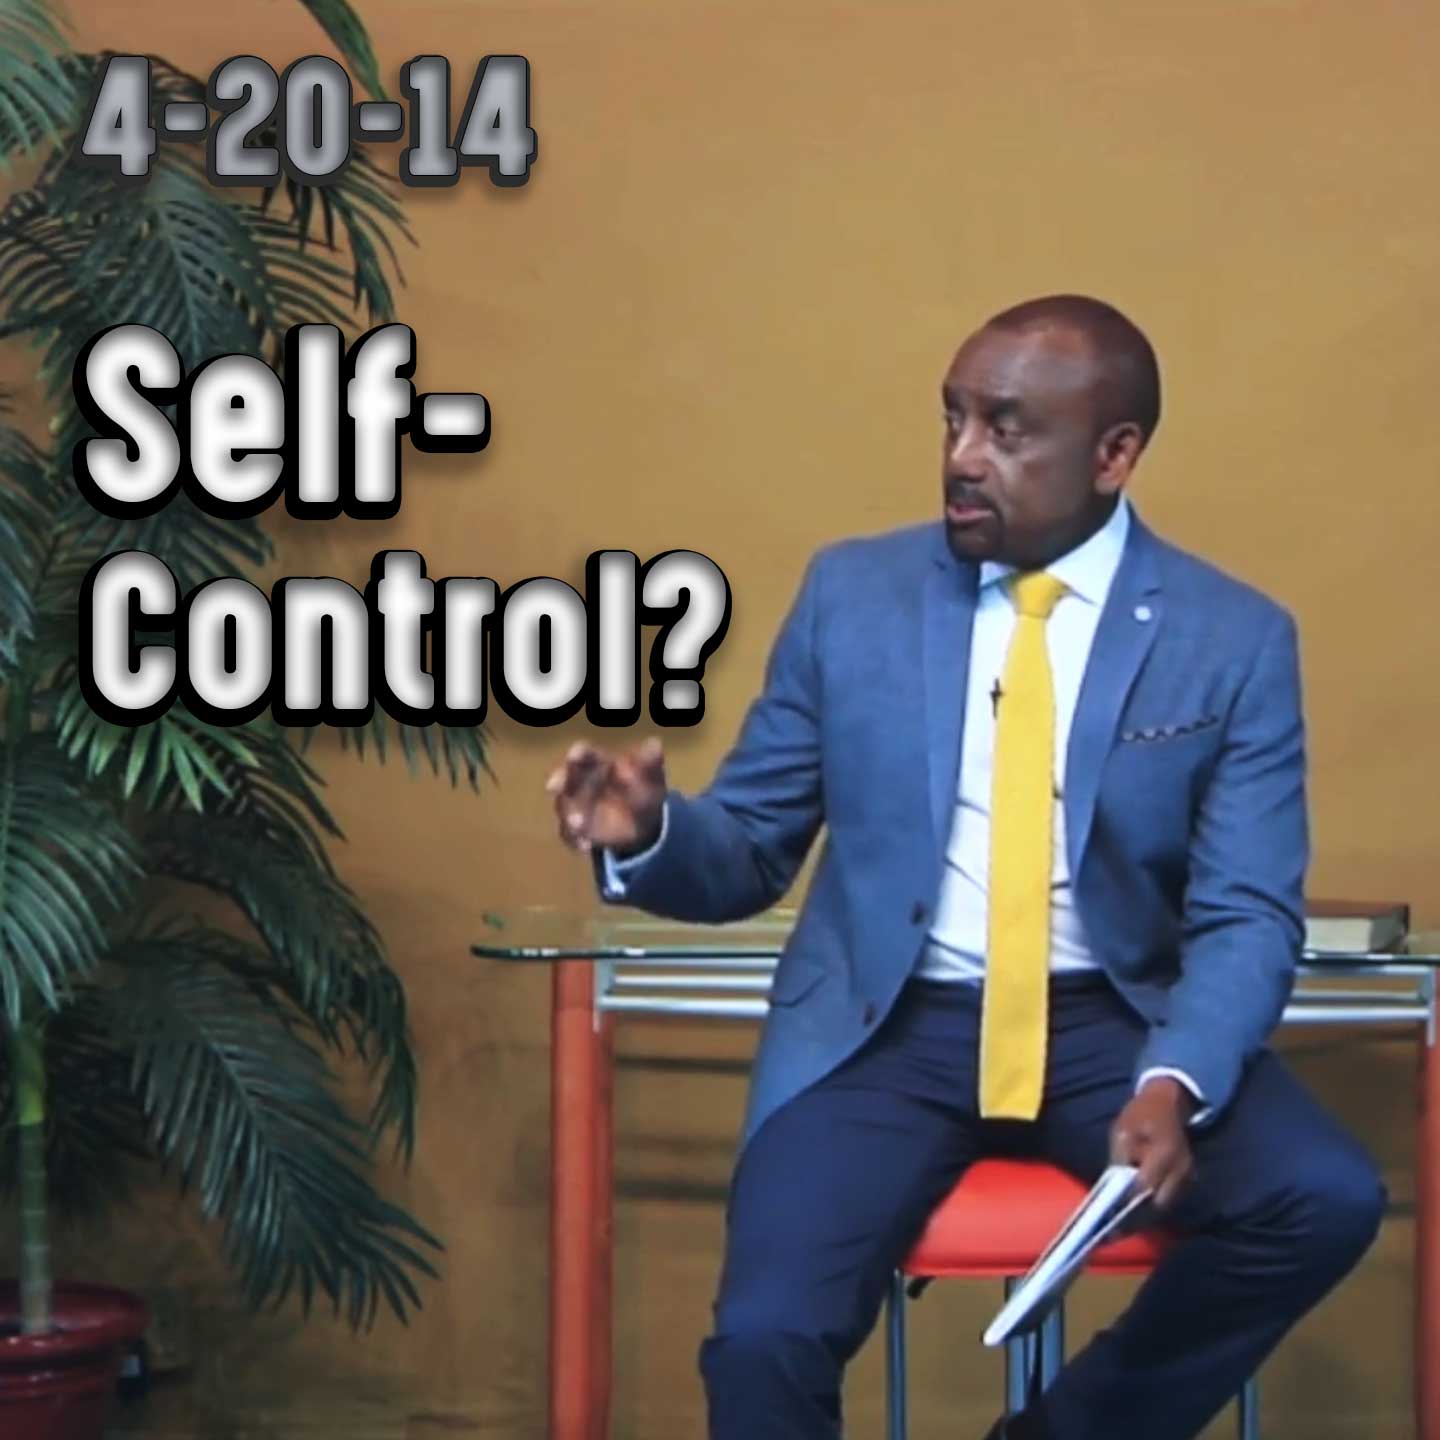 Do you have wisdom? Self-control? Archive Easter Sunday Service 4/20/14